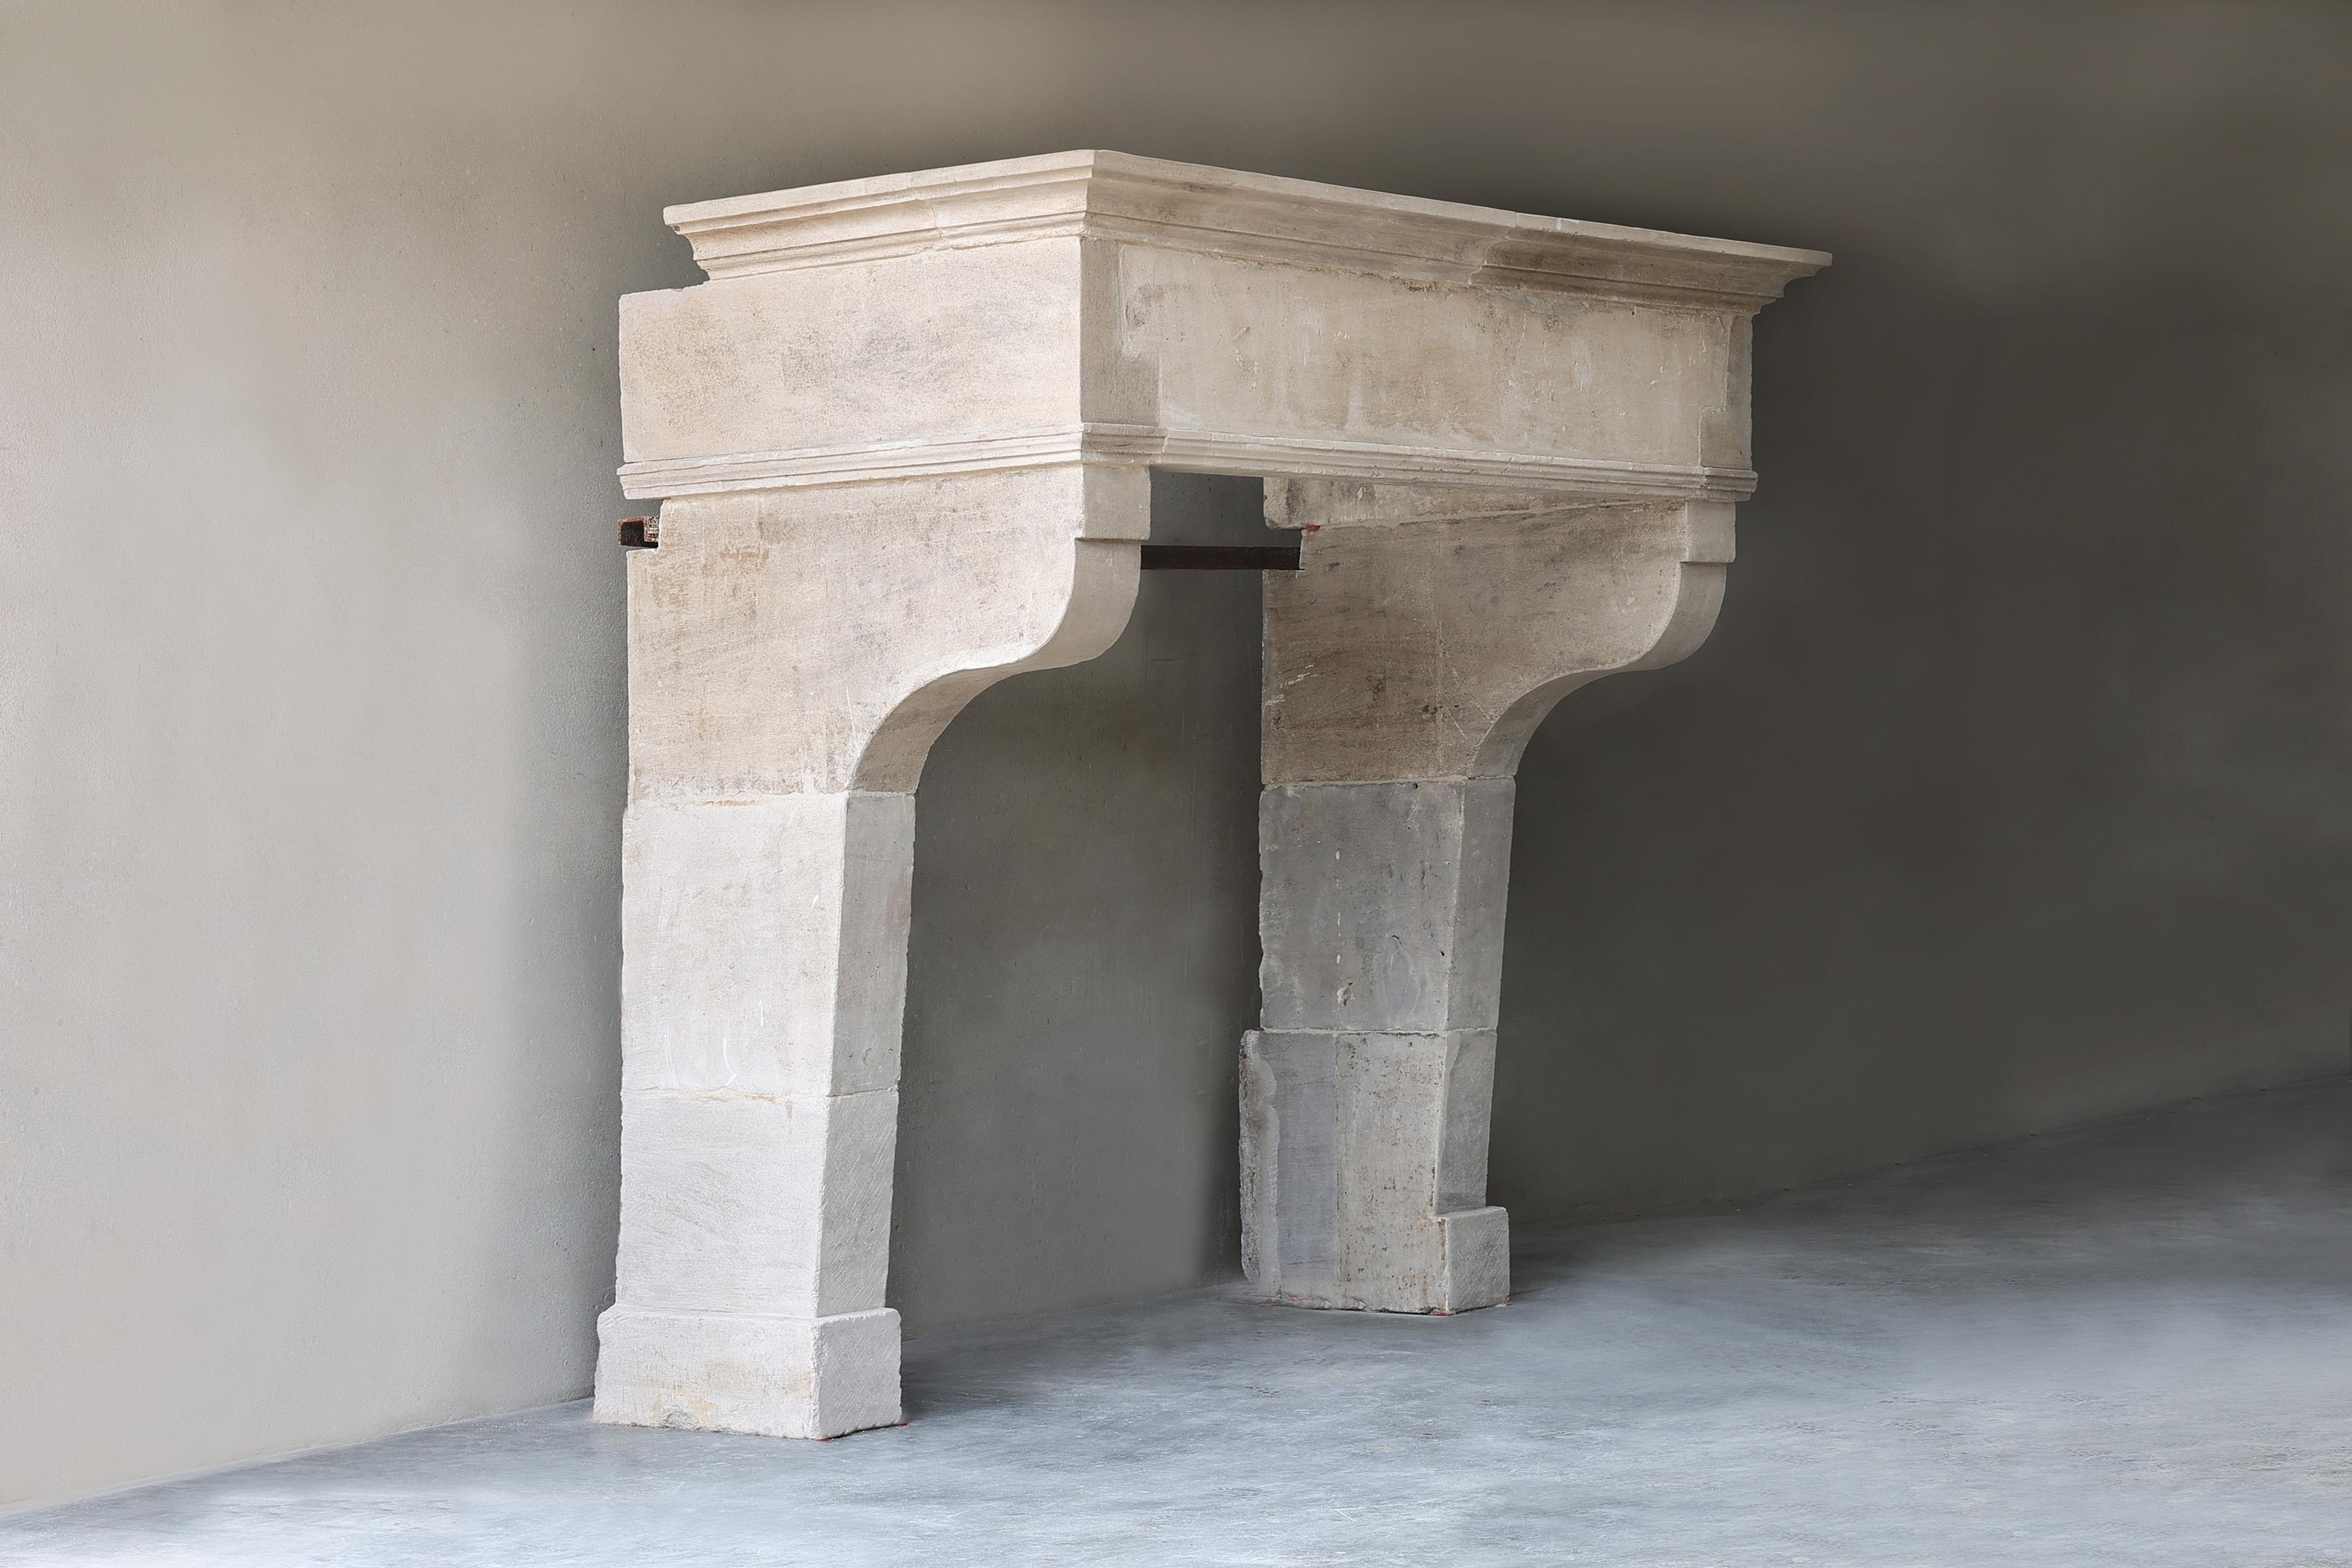 Beautiful antique castle mantelpiece made of French limestone from the 19th century! This beautiful fireplace has a wide top with slightly curved legs. A rustic mantle with a historic look.